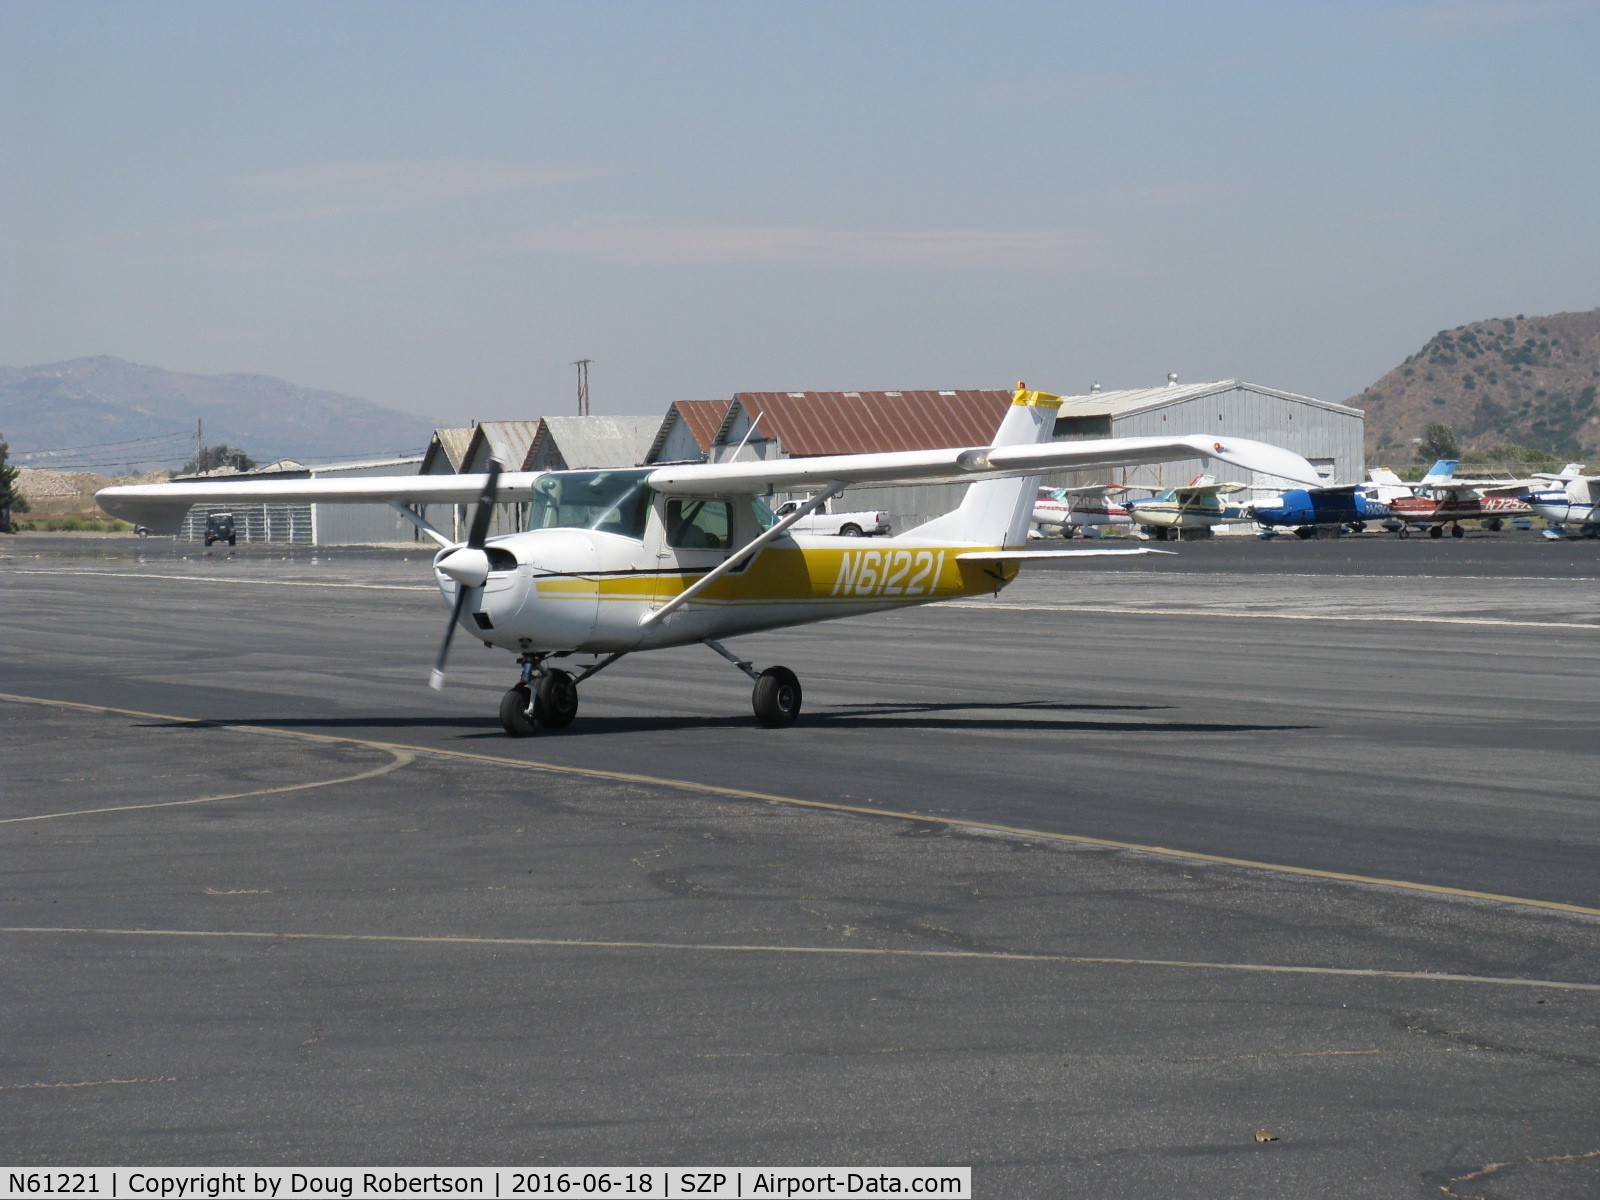 N61221, 1969 Cessna 150J C/N 15070896, 1969 Cessna 150J, Continental O-200 100 Hp, taxi off the active